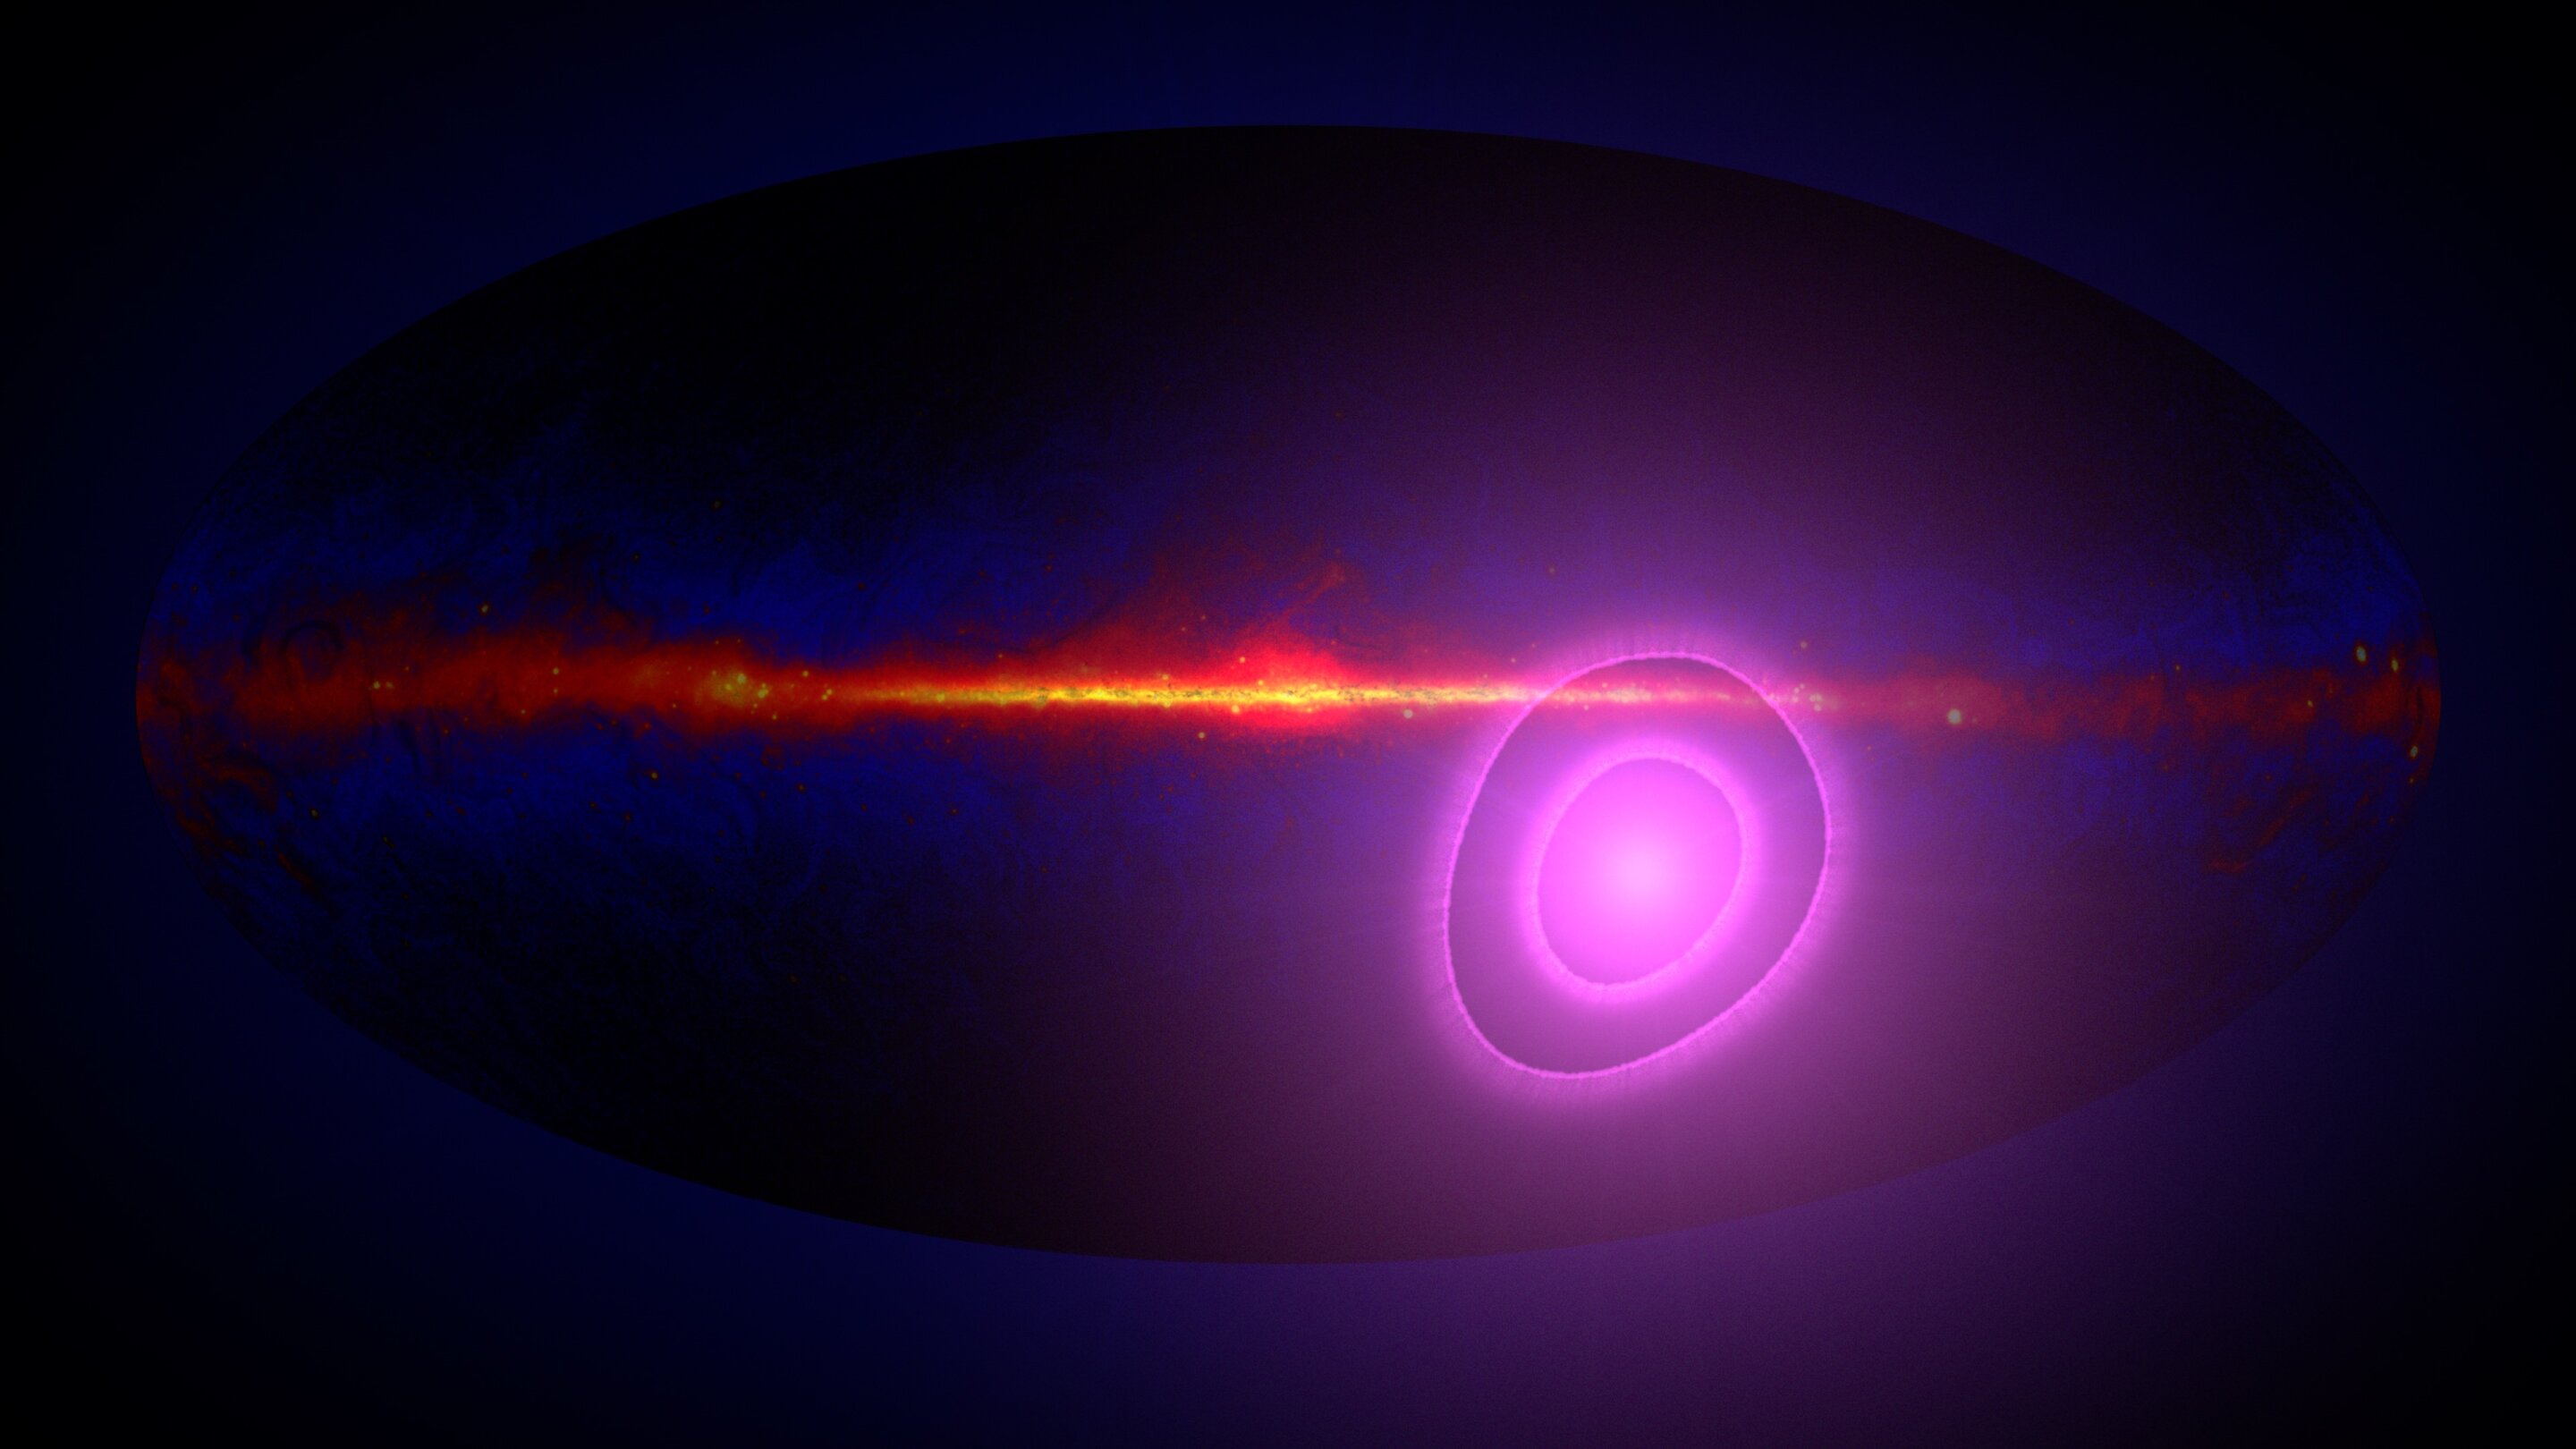 The Fermi Gamma-ray Space Telescope detects a surprising feature of gamma rays outside our galaxy